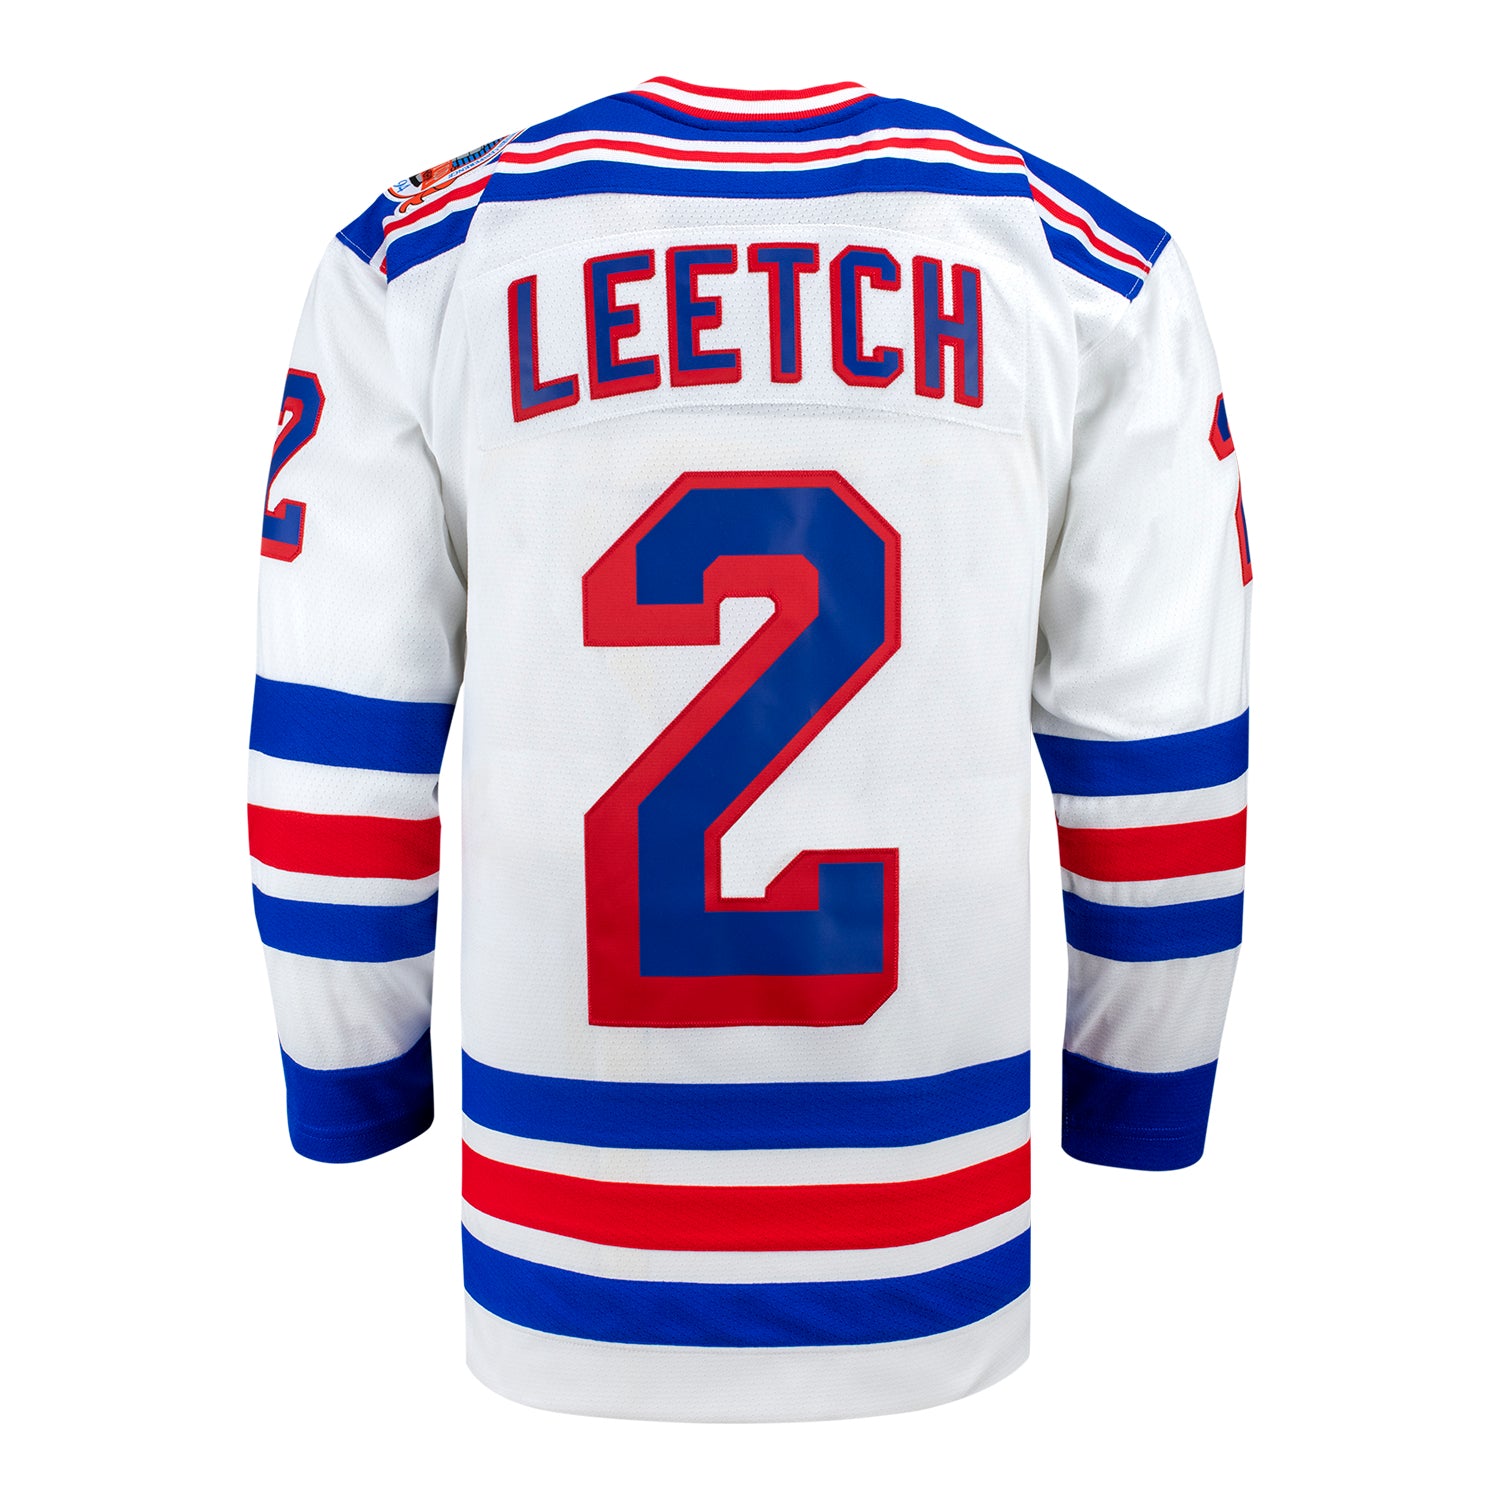 New York Rangers Brian Leetch Signed Jerseys, Collectible Brian